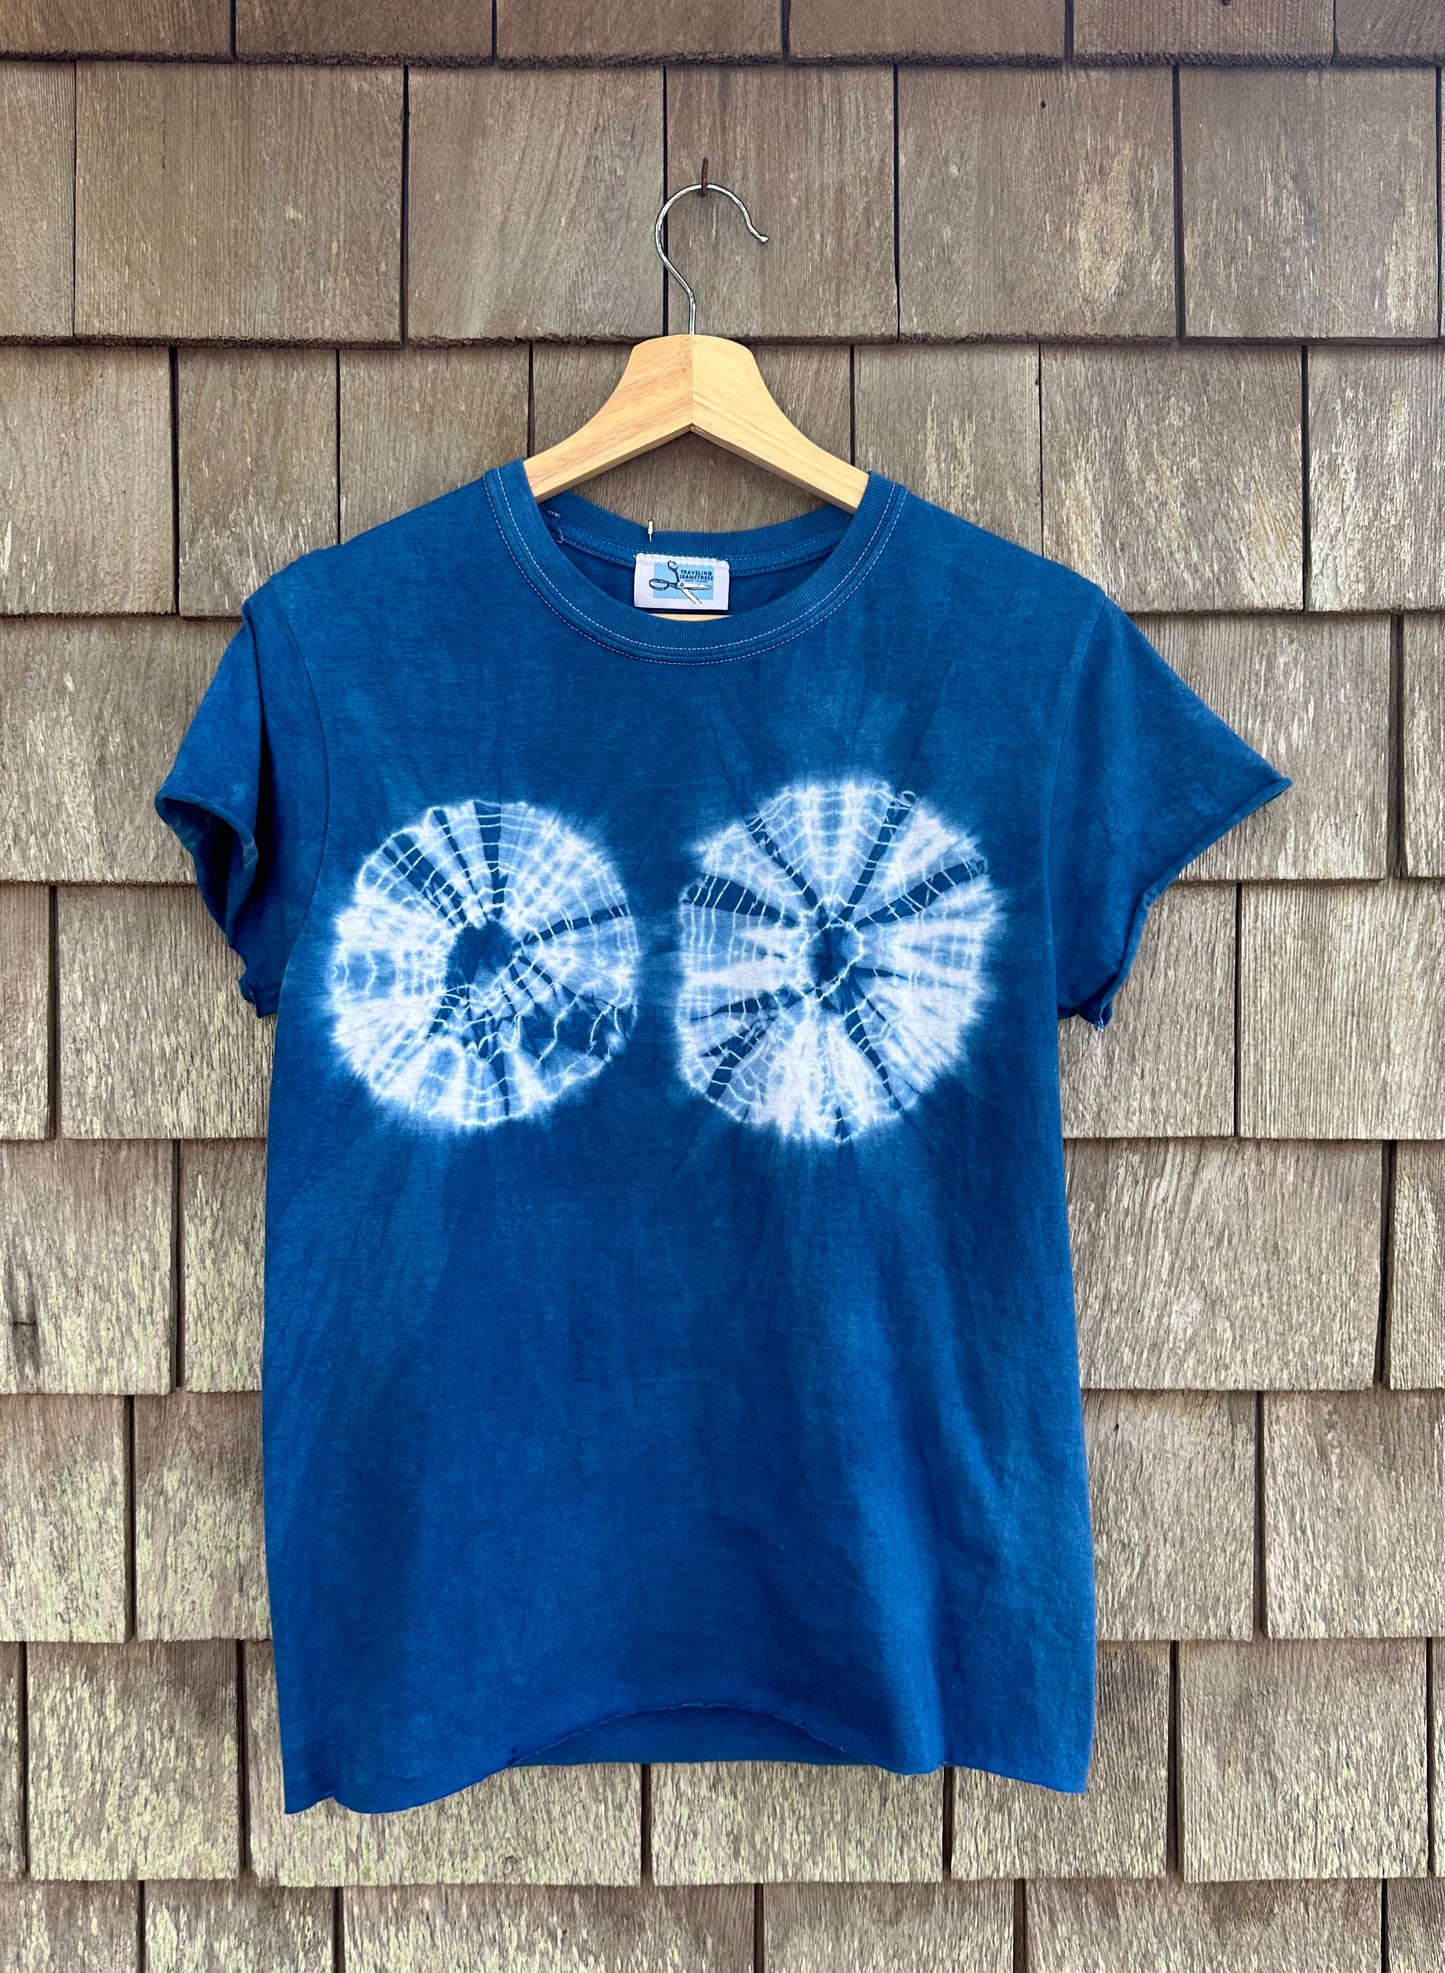 A vibrant tie dye shirt featuring a beautiful indigo and design.